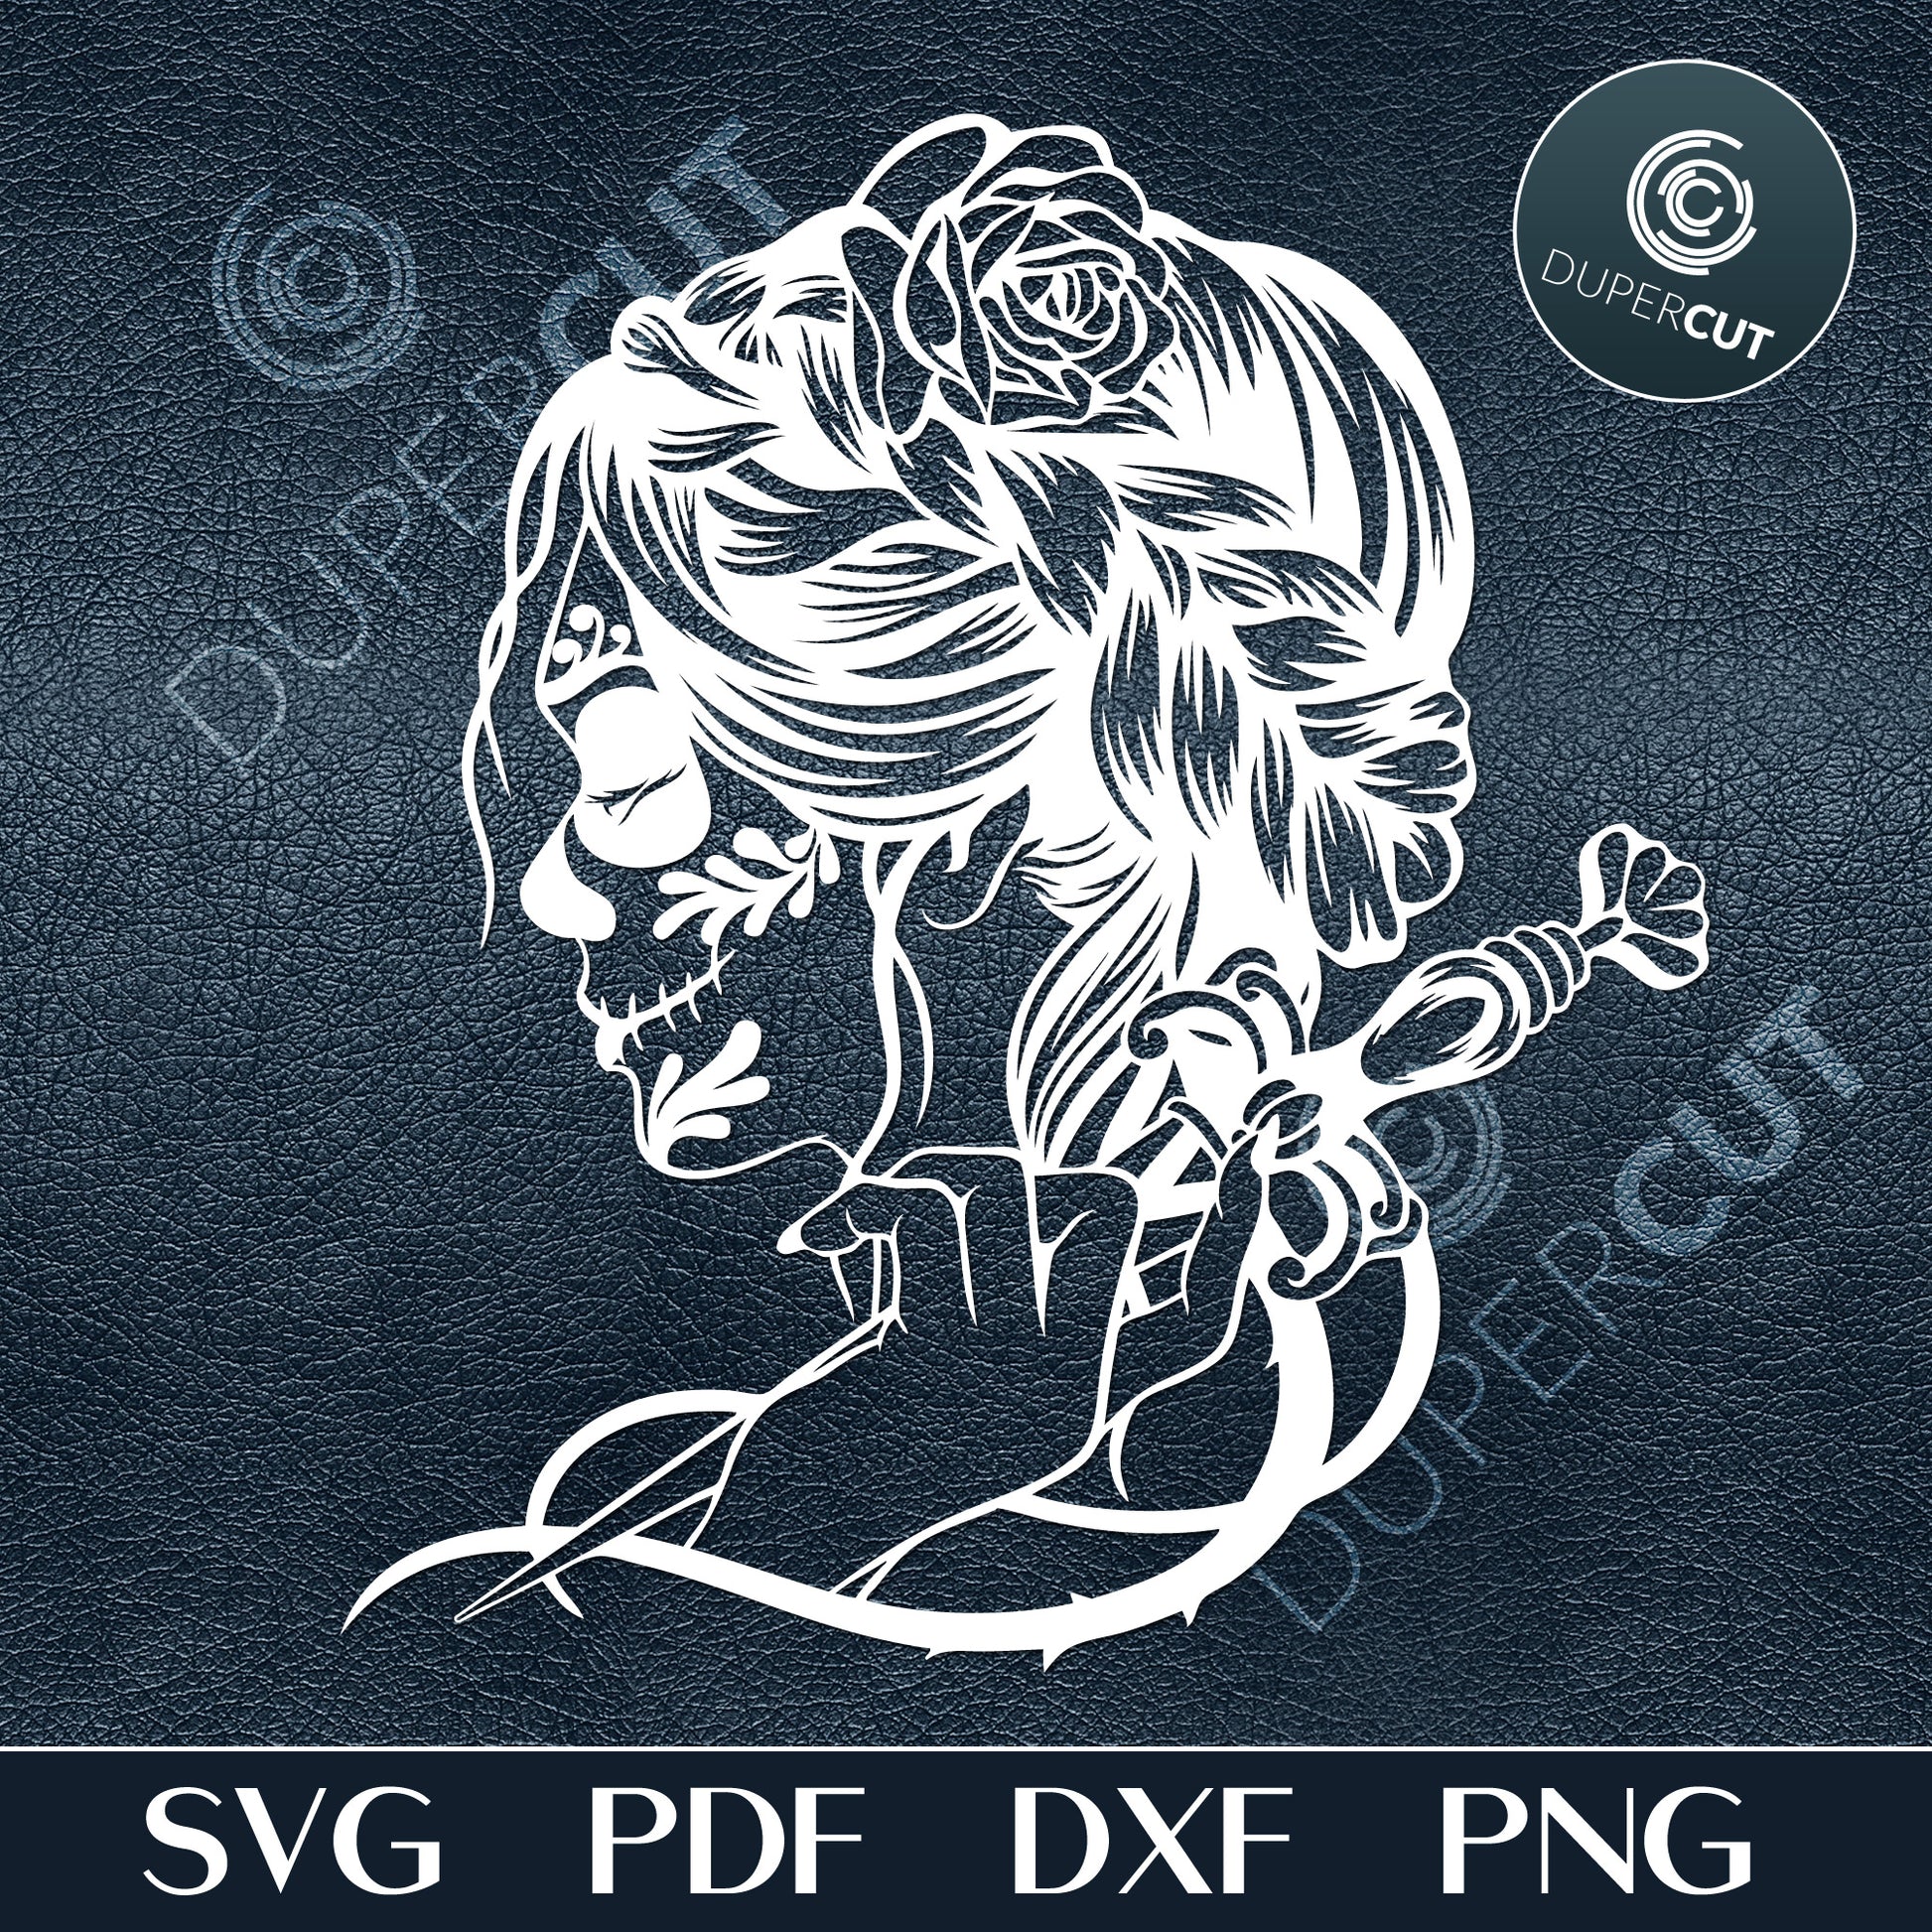 Female sugar skull with knife, detailed line art illustration, paper cutting  template - SVG DXF PNG files for Cricut, Glowforge, Silhouette Cameo, CNC Machines